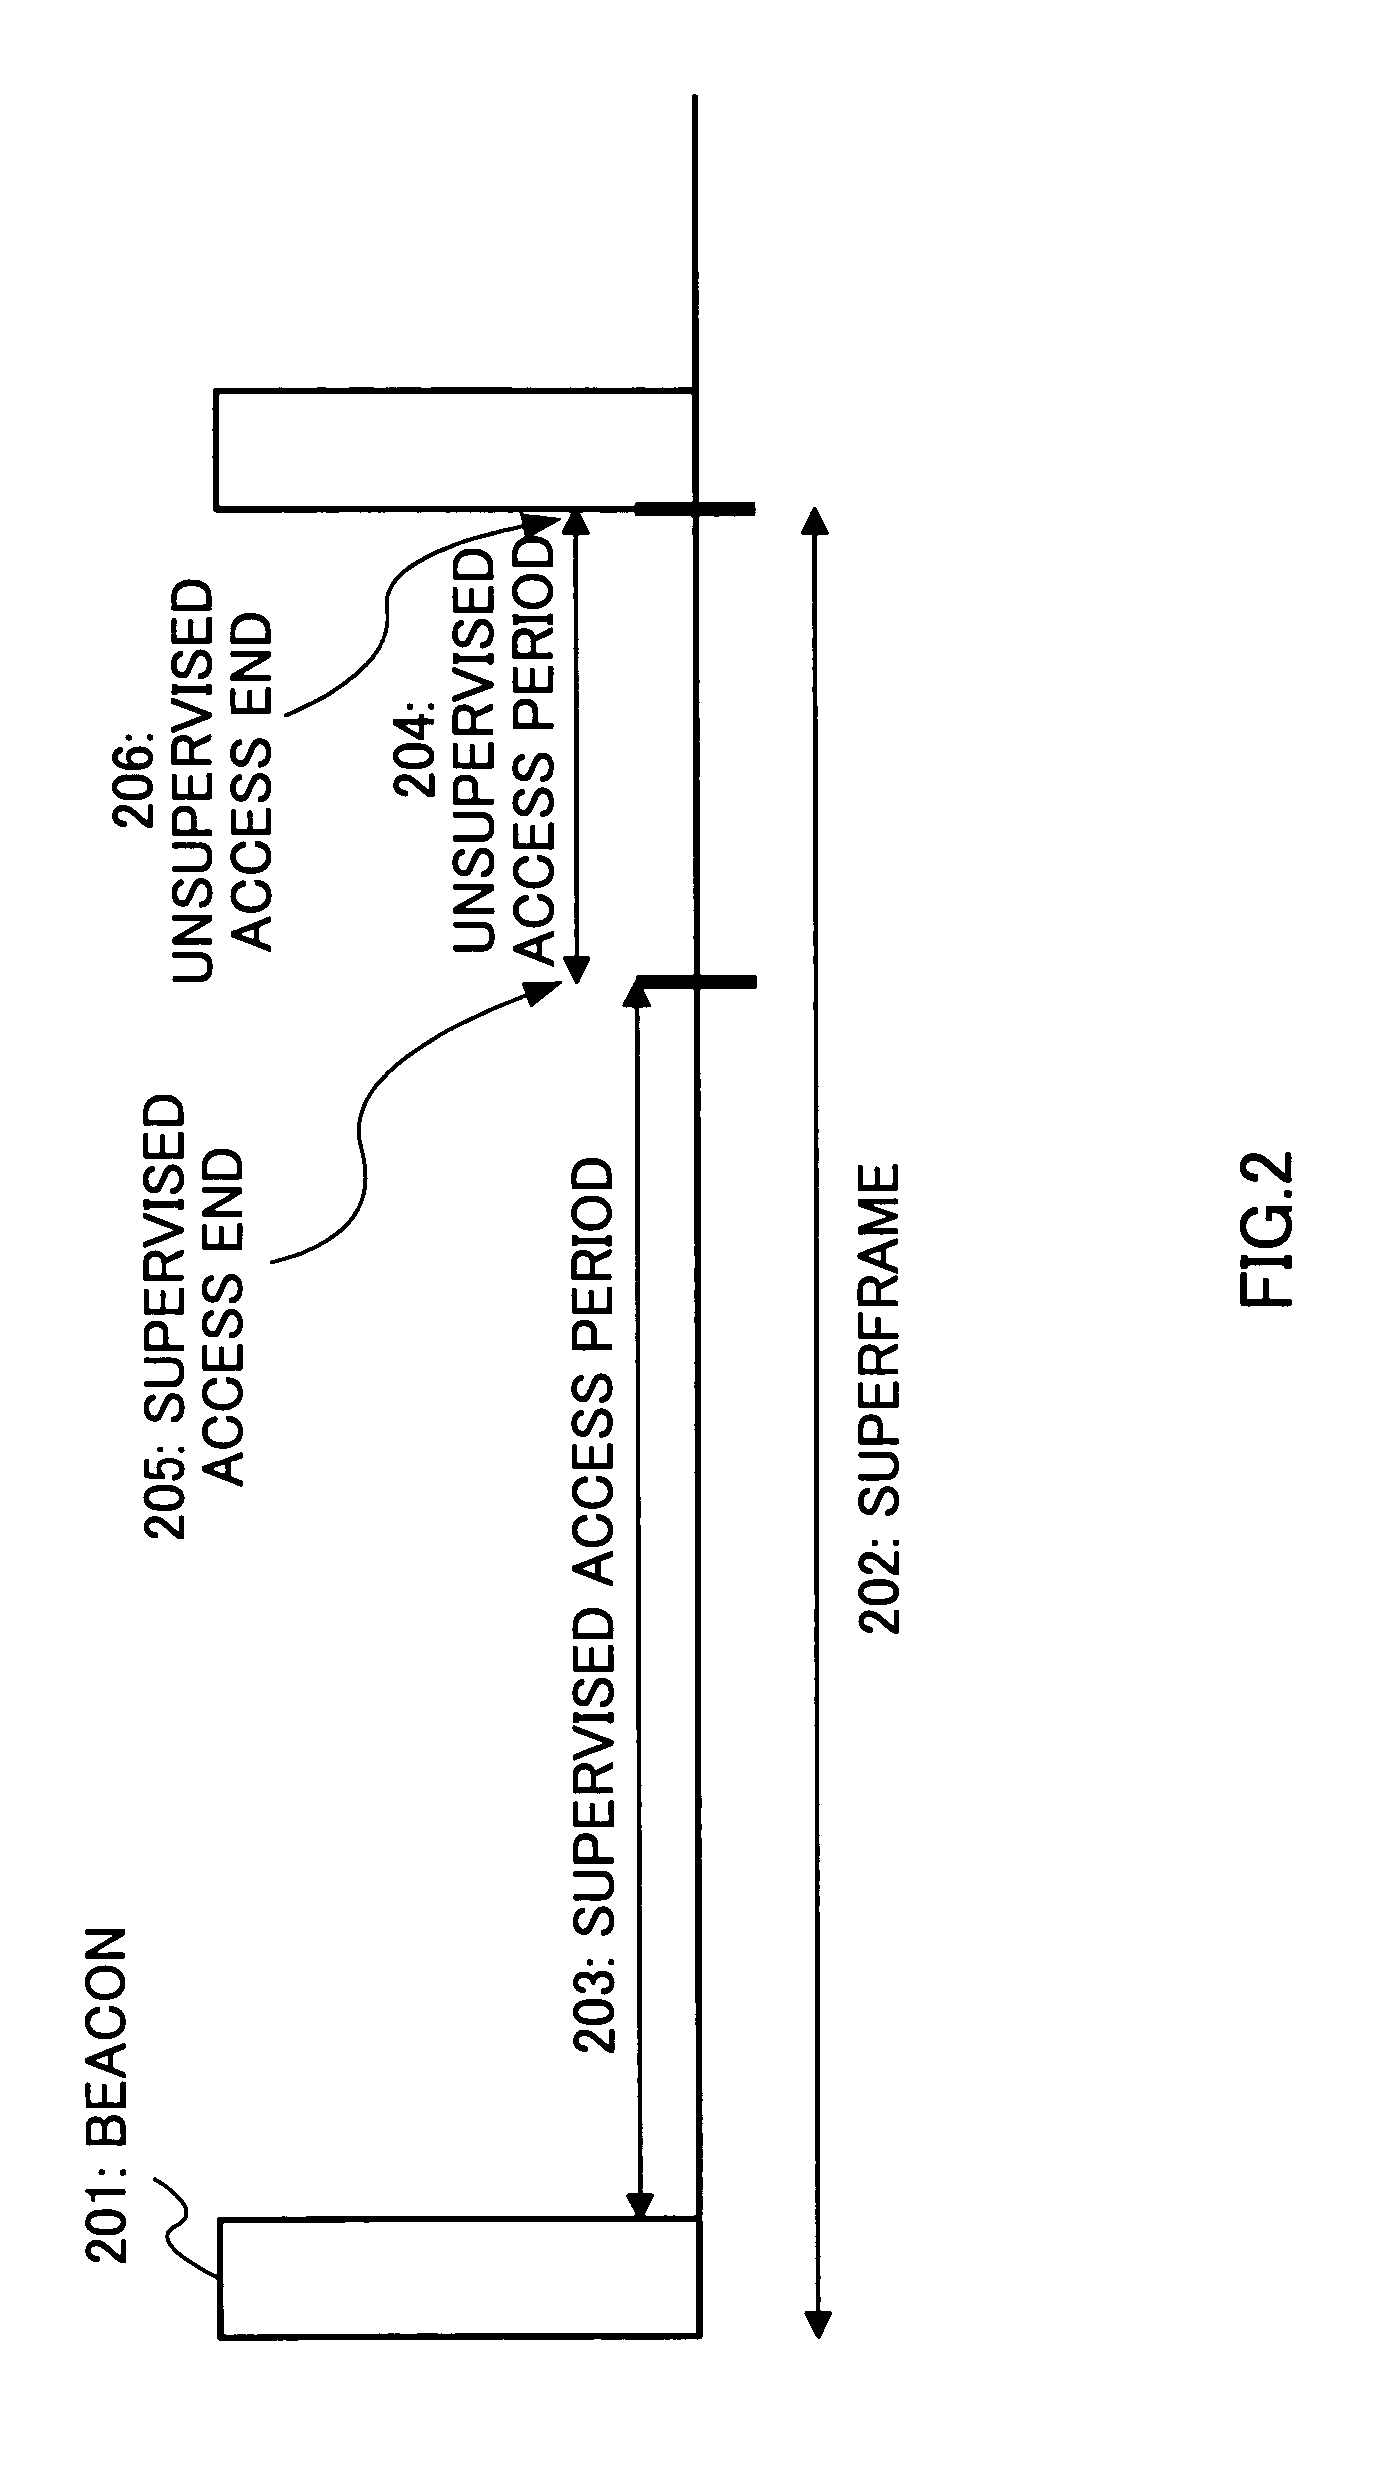 Access point in a wireless network medium access control system